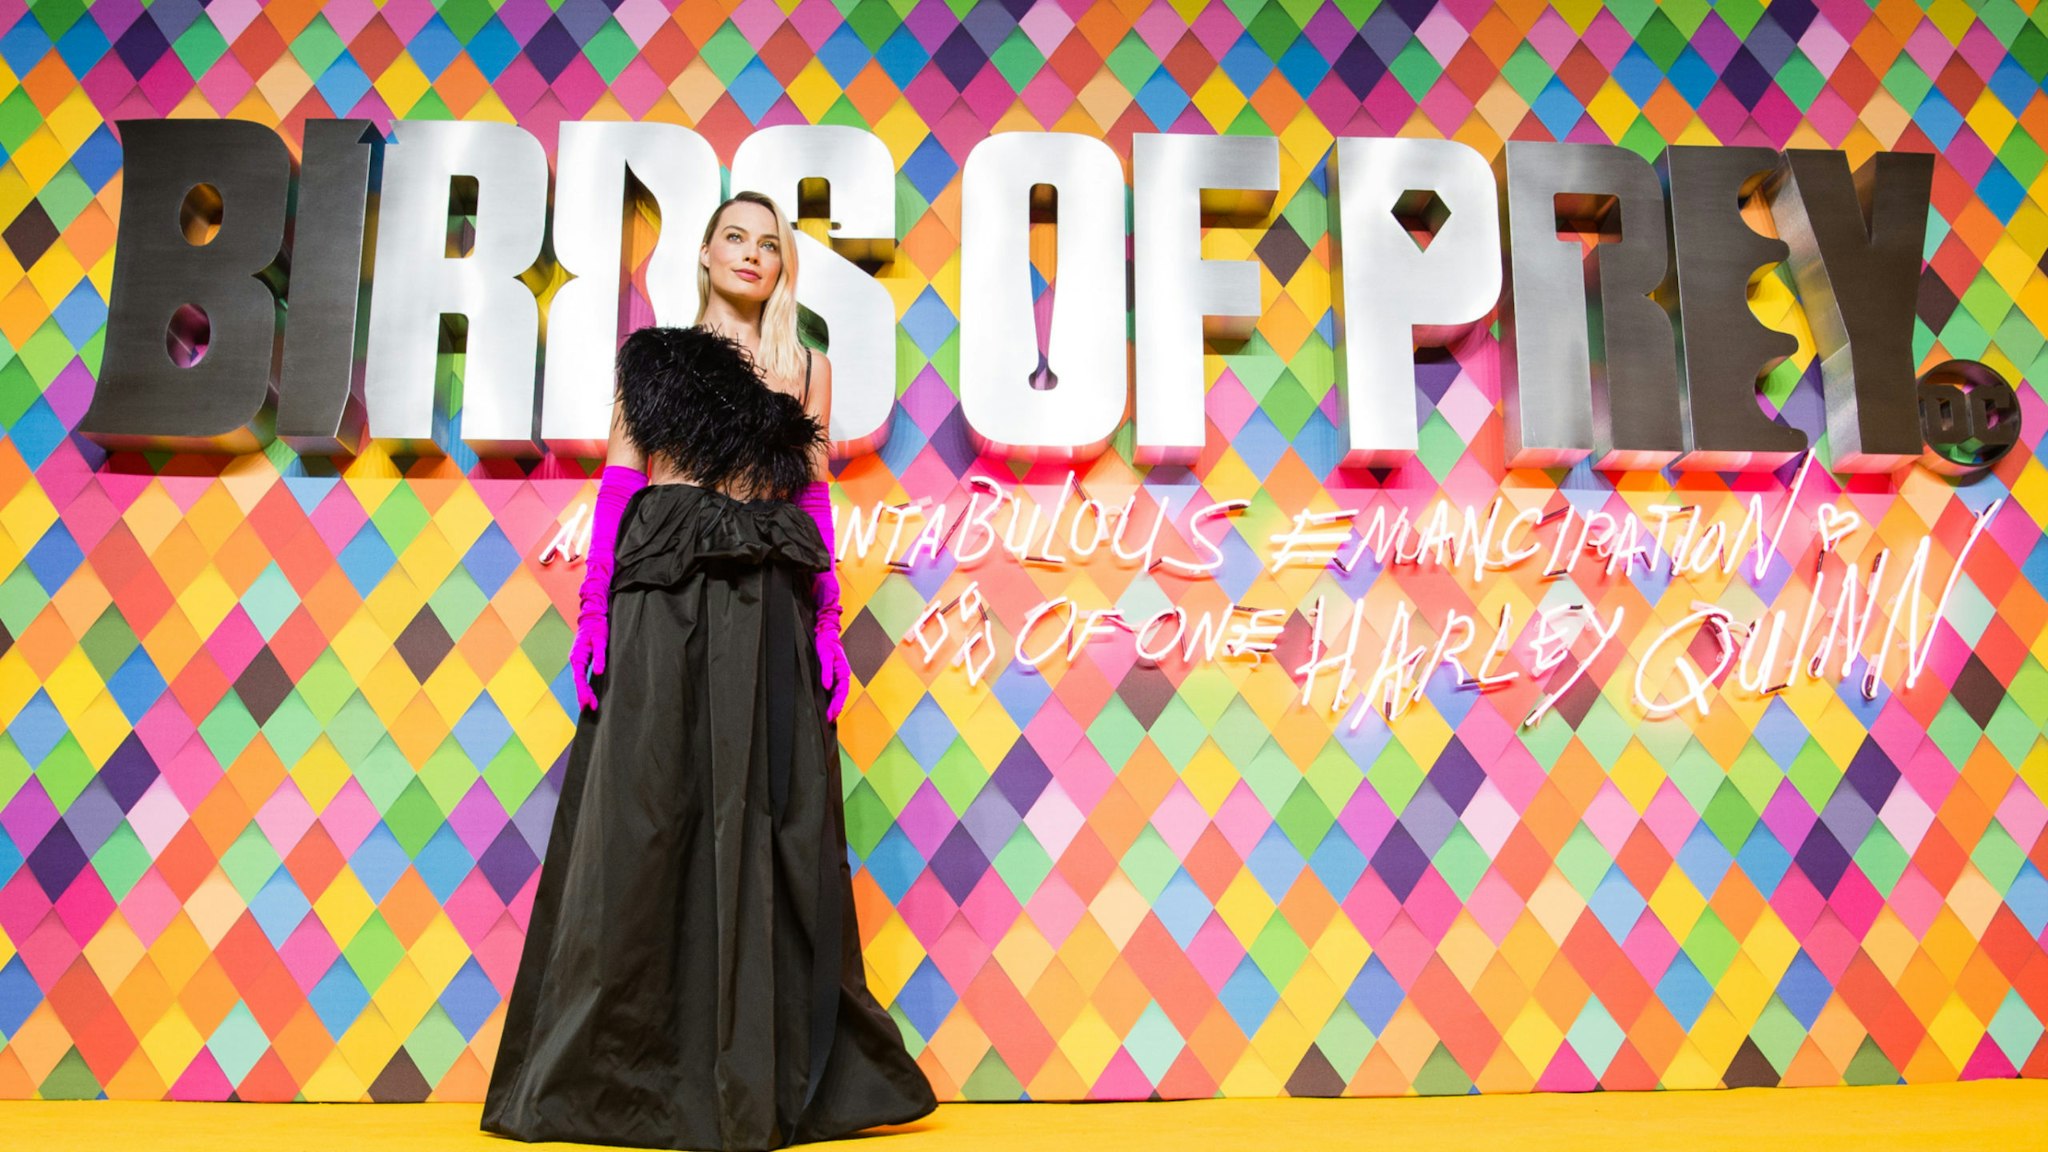 Margot Robbie attends the "Birds of Prey: And the Fantabulous Emancipation Of One Harley Quinn" World Premiere at the BFI IMAX on January 29, 2020 in London, England.